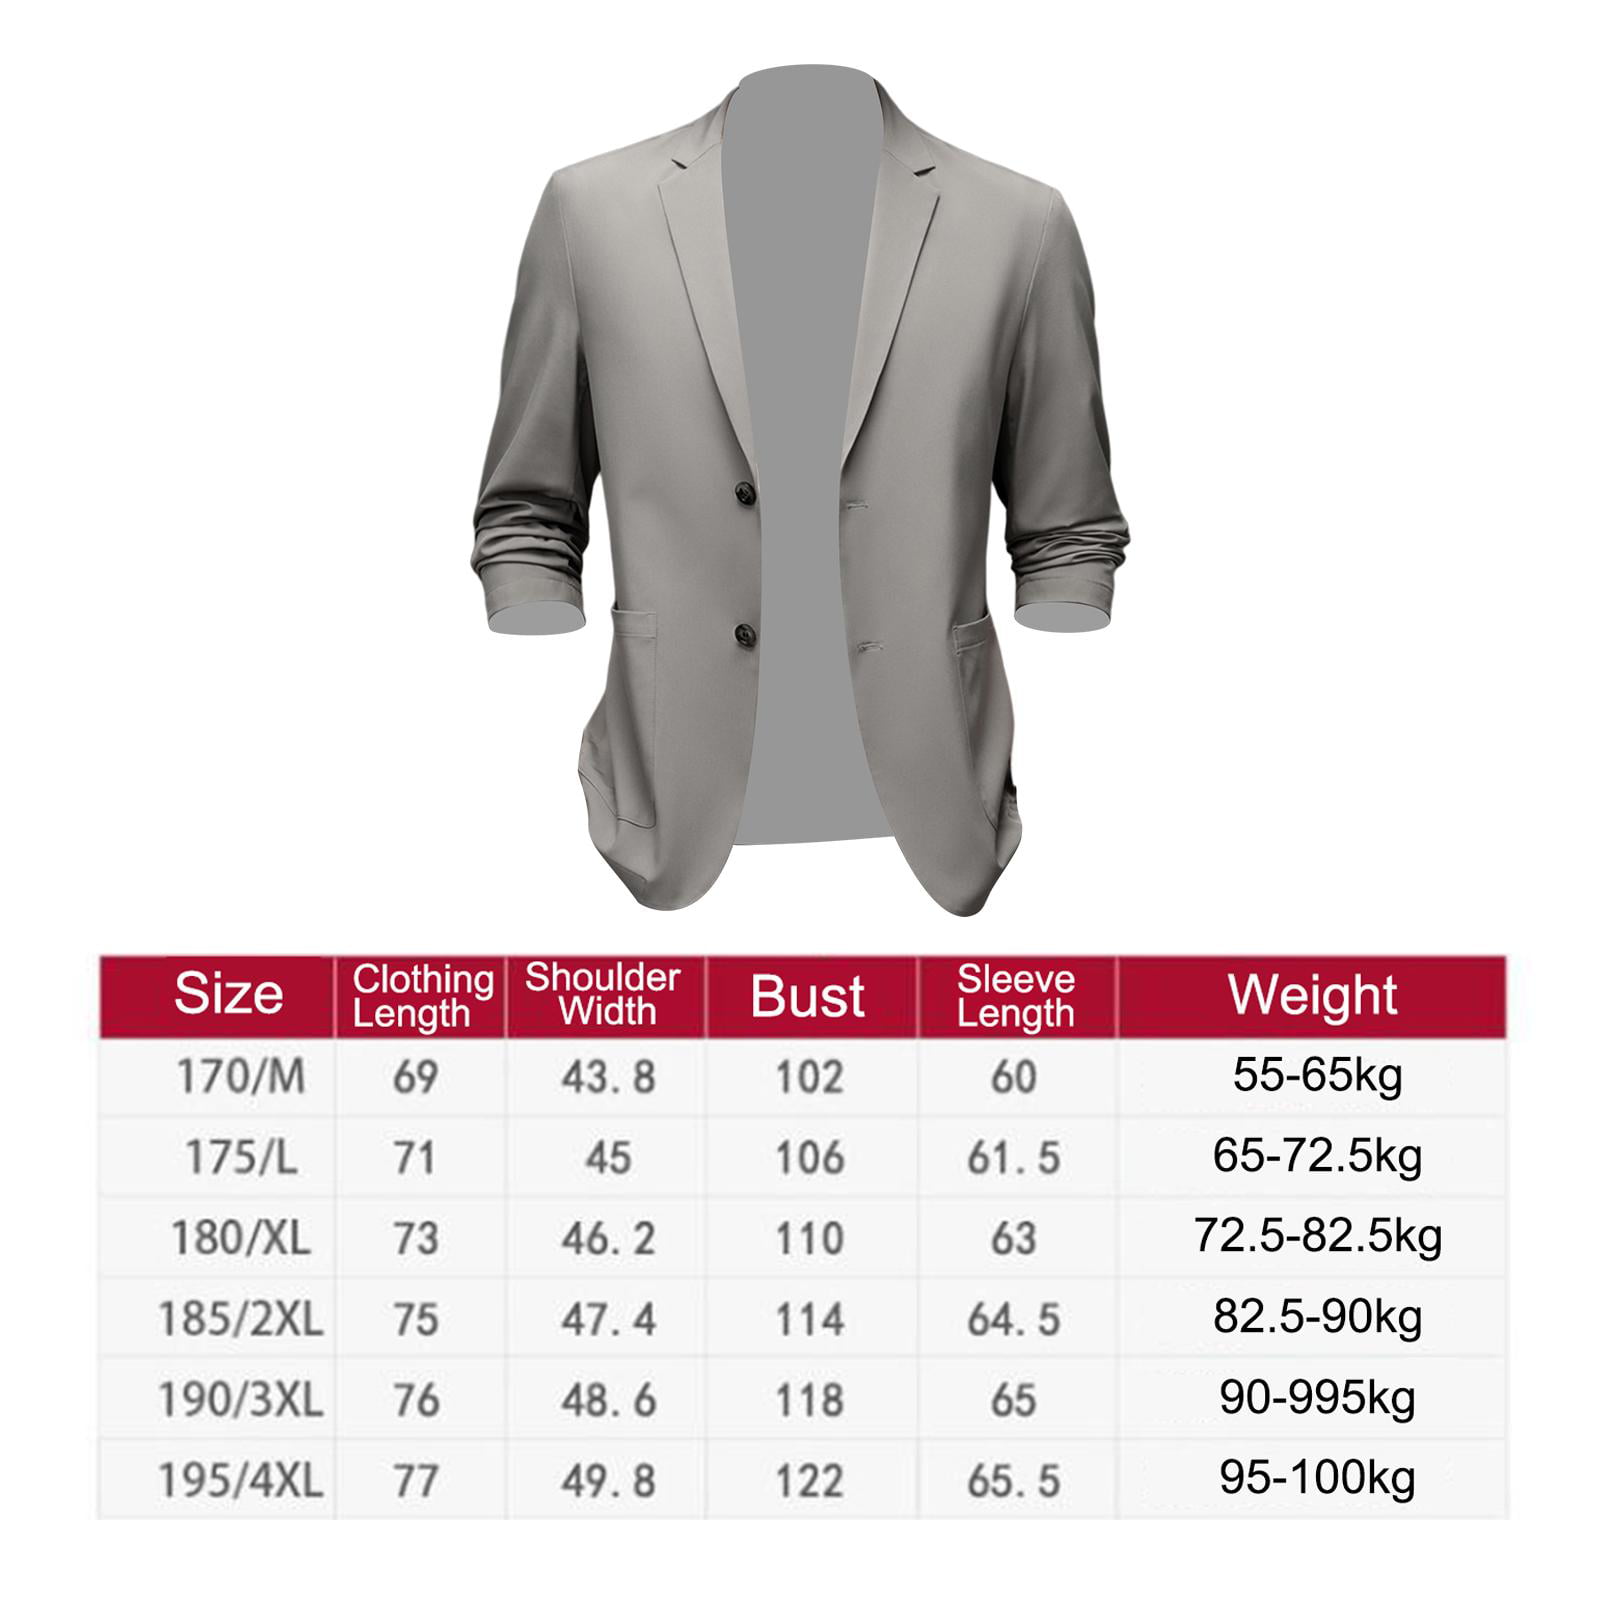 Slix Fit 3 Piece Men's Suit, Slim Fit Stylish Jacket, Pants, Vest, 2 Ties,  and Belt, Perfect for Weddings, Business and More Blue at Amazon Men's  Clothing store